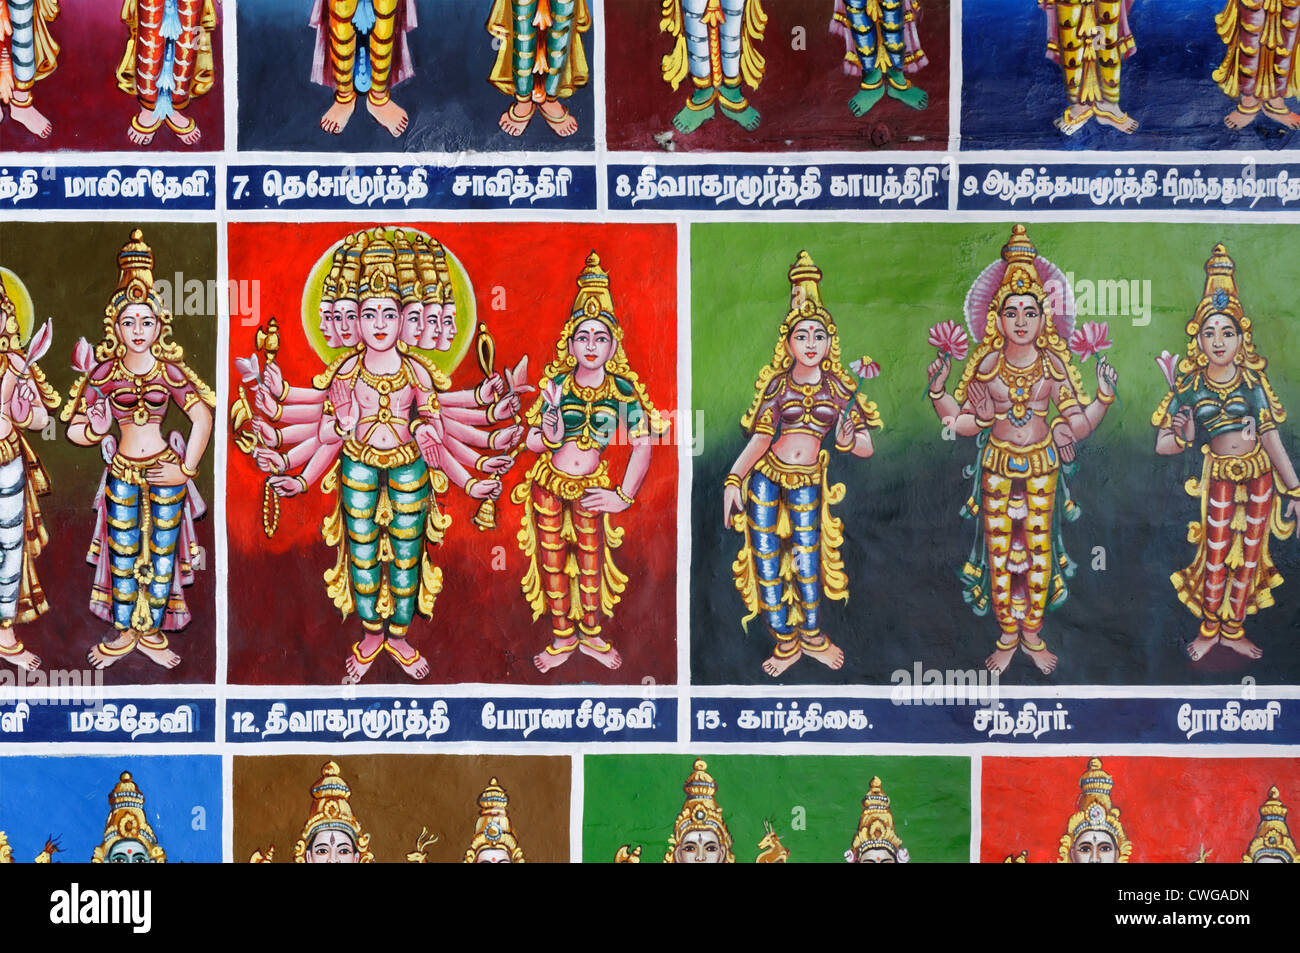 Paintings from Indian mythology on the wall of the Meenakshi temple in Madurai India Stock Photo